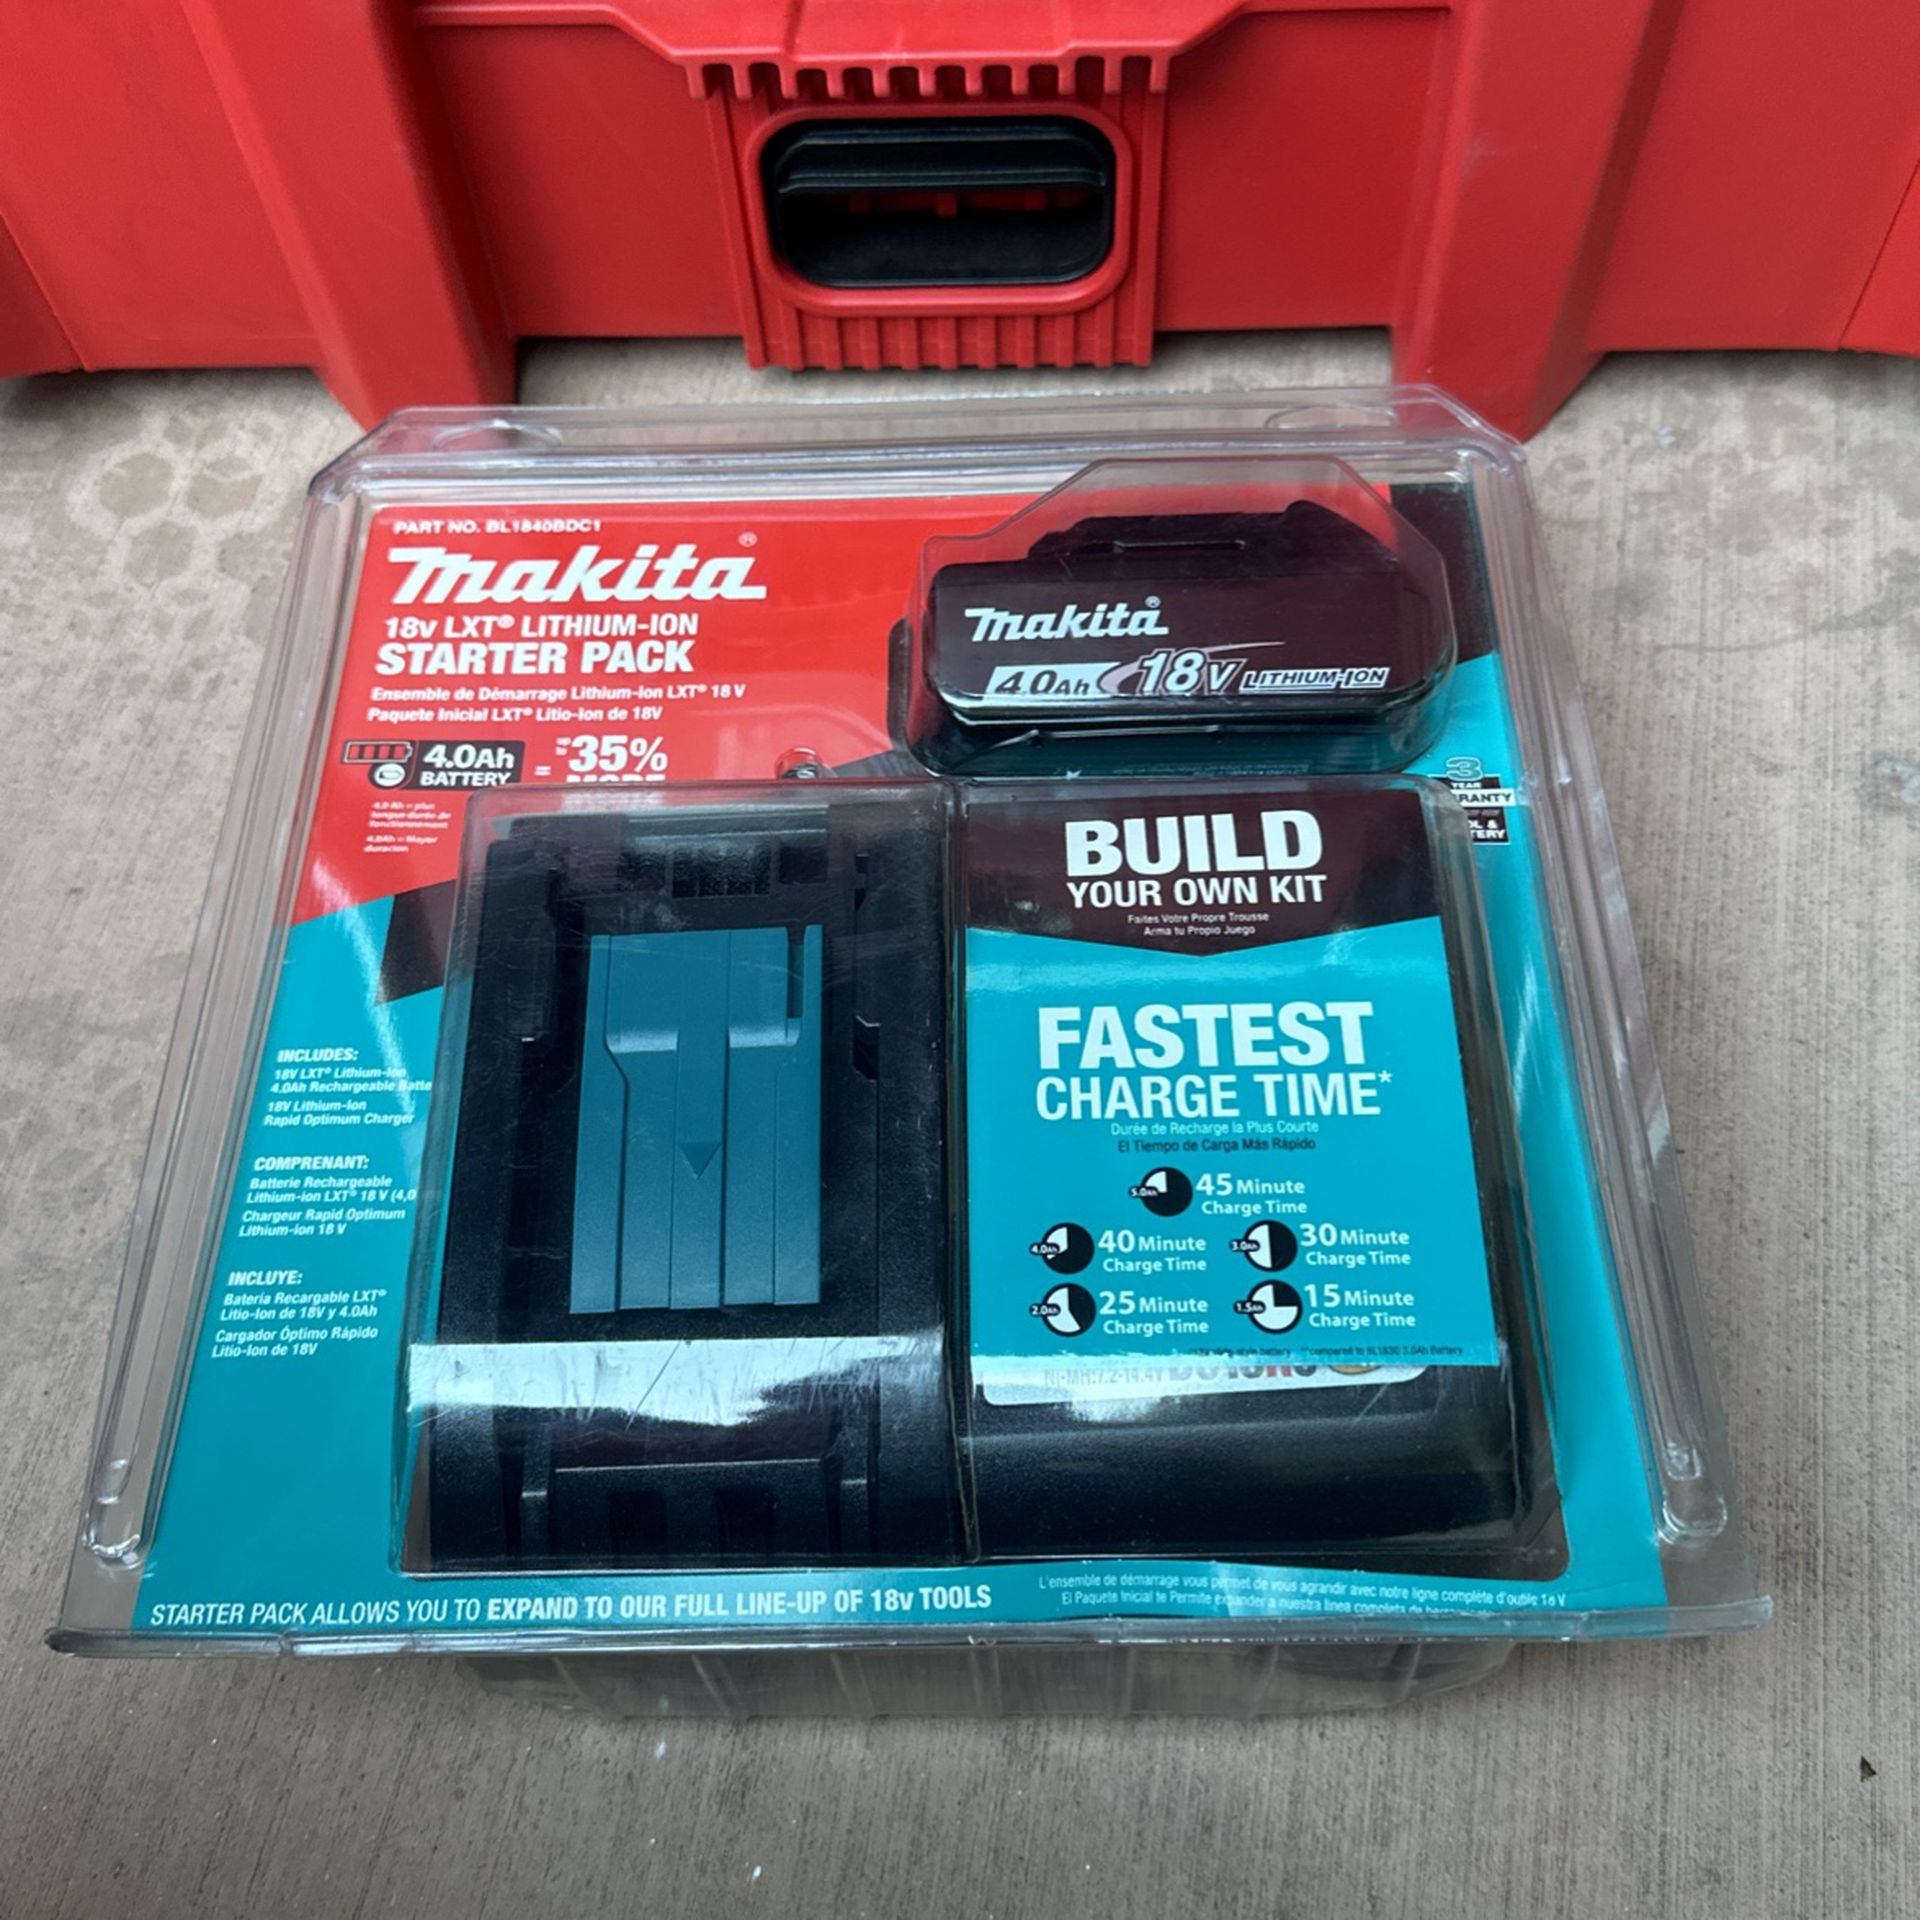 Makita Pack 4.0  ah Fastest Charger Time 